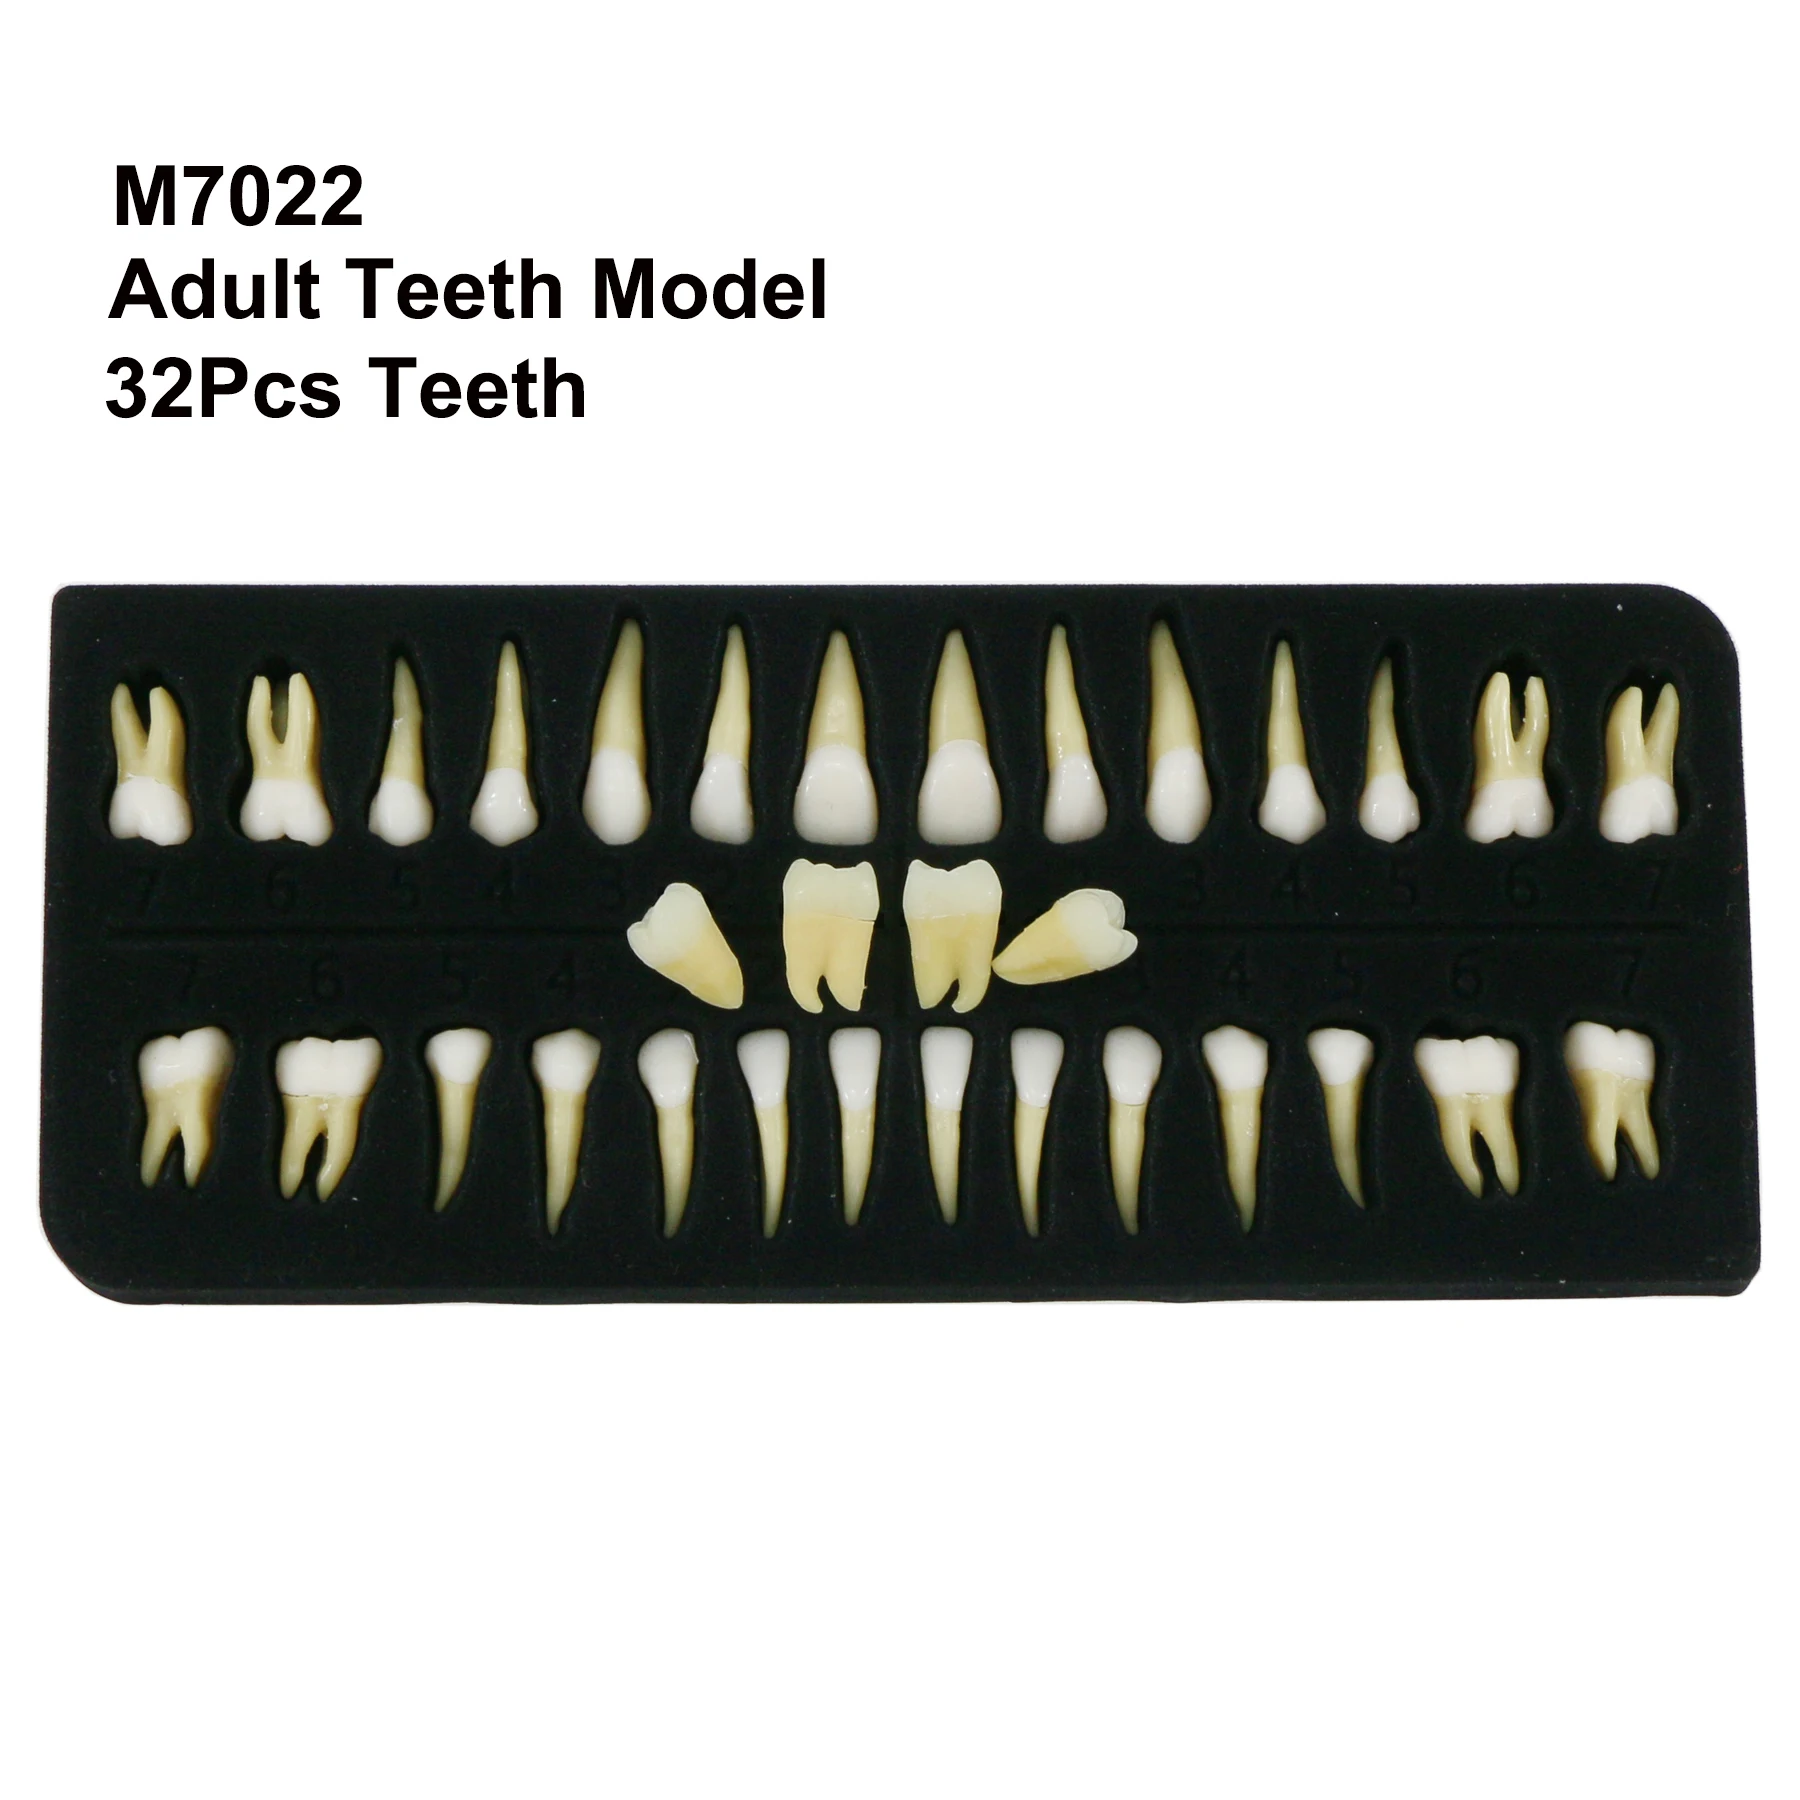 

32Pcs Upper And Lower Dental Natural Standard Normal Adult Permanent Teeth Model Demo M7022 For Demonstration Teach Study